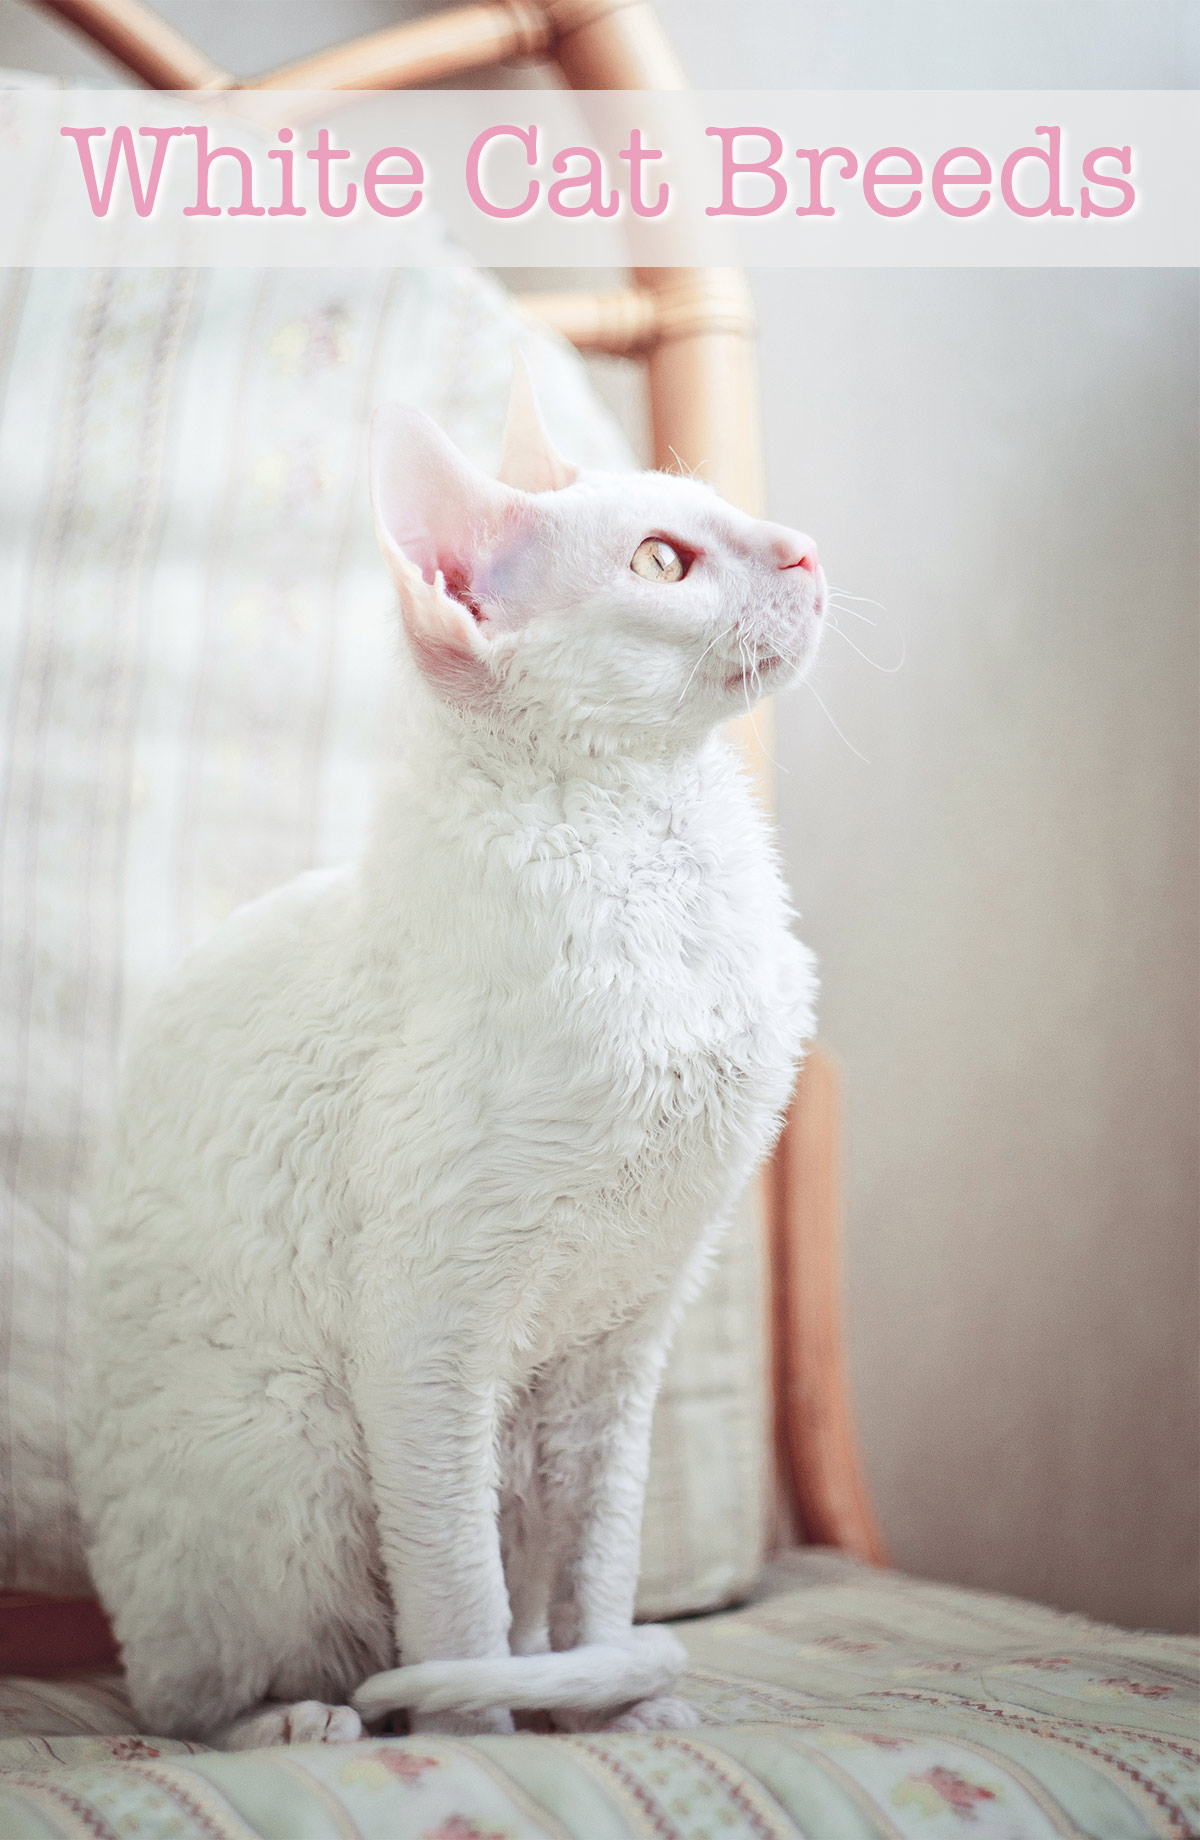 White Cat Breeds - All About The Most Beautiful Pale Kitties